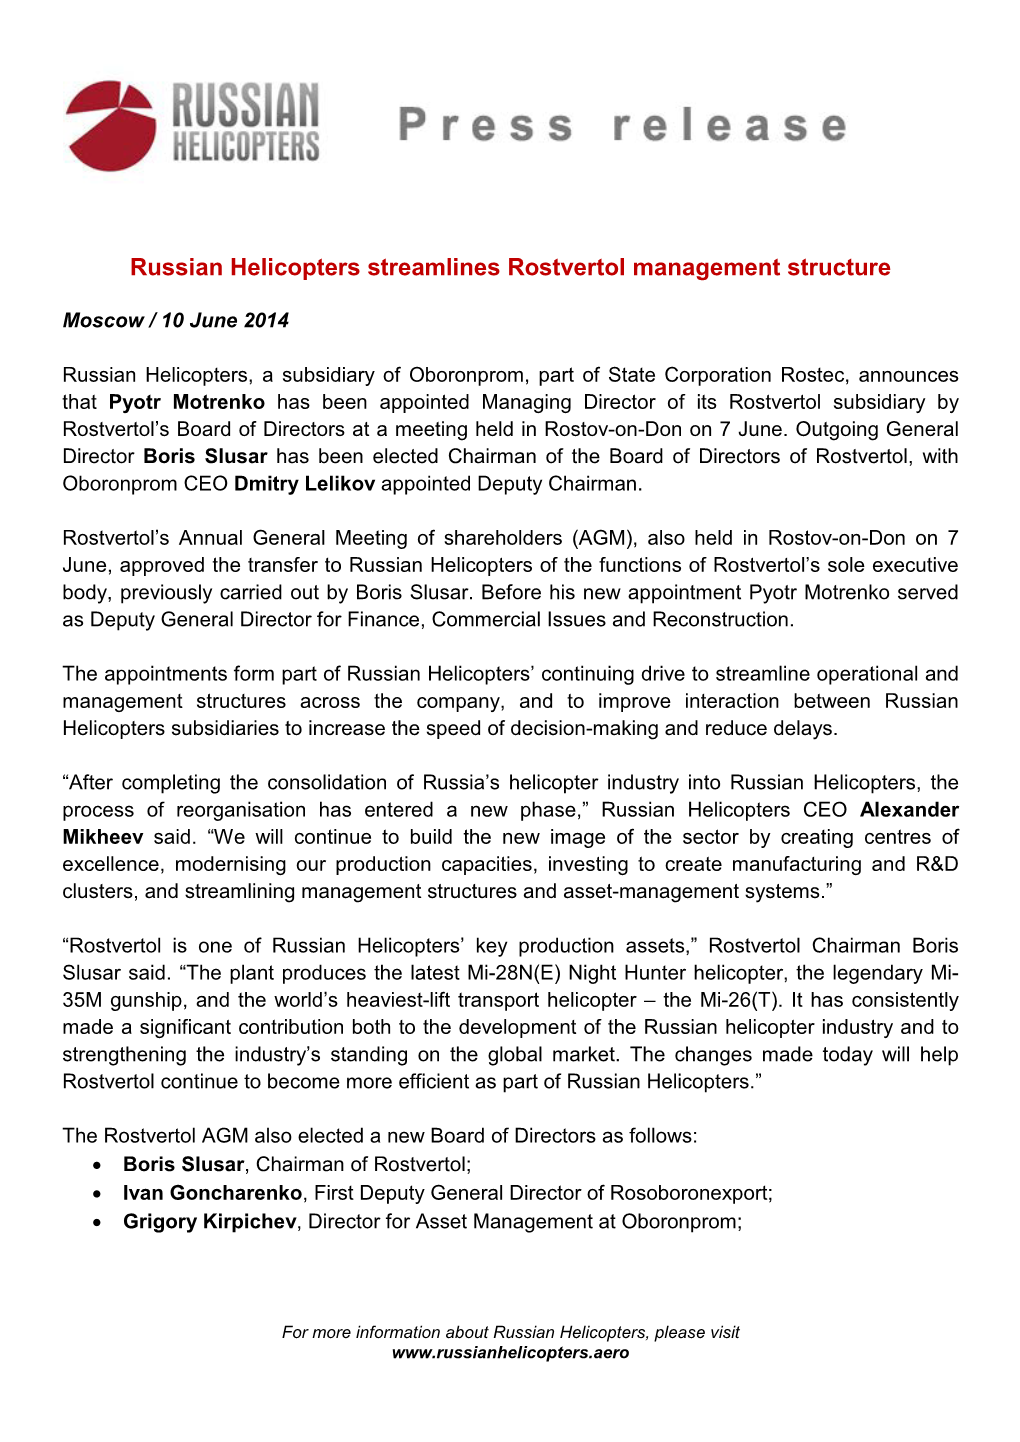 Russian Helicopters Streamlines Rostvertol Management Structure